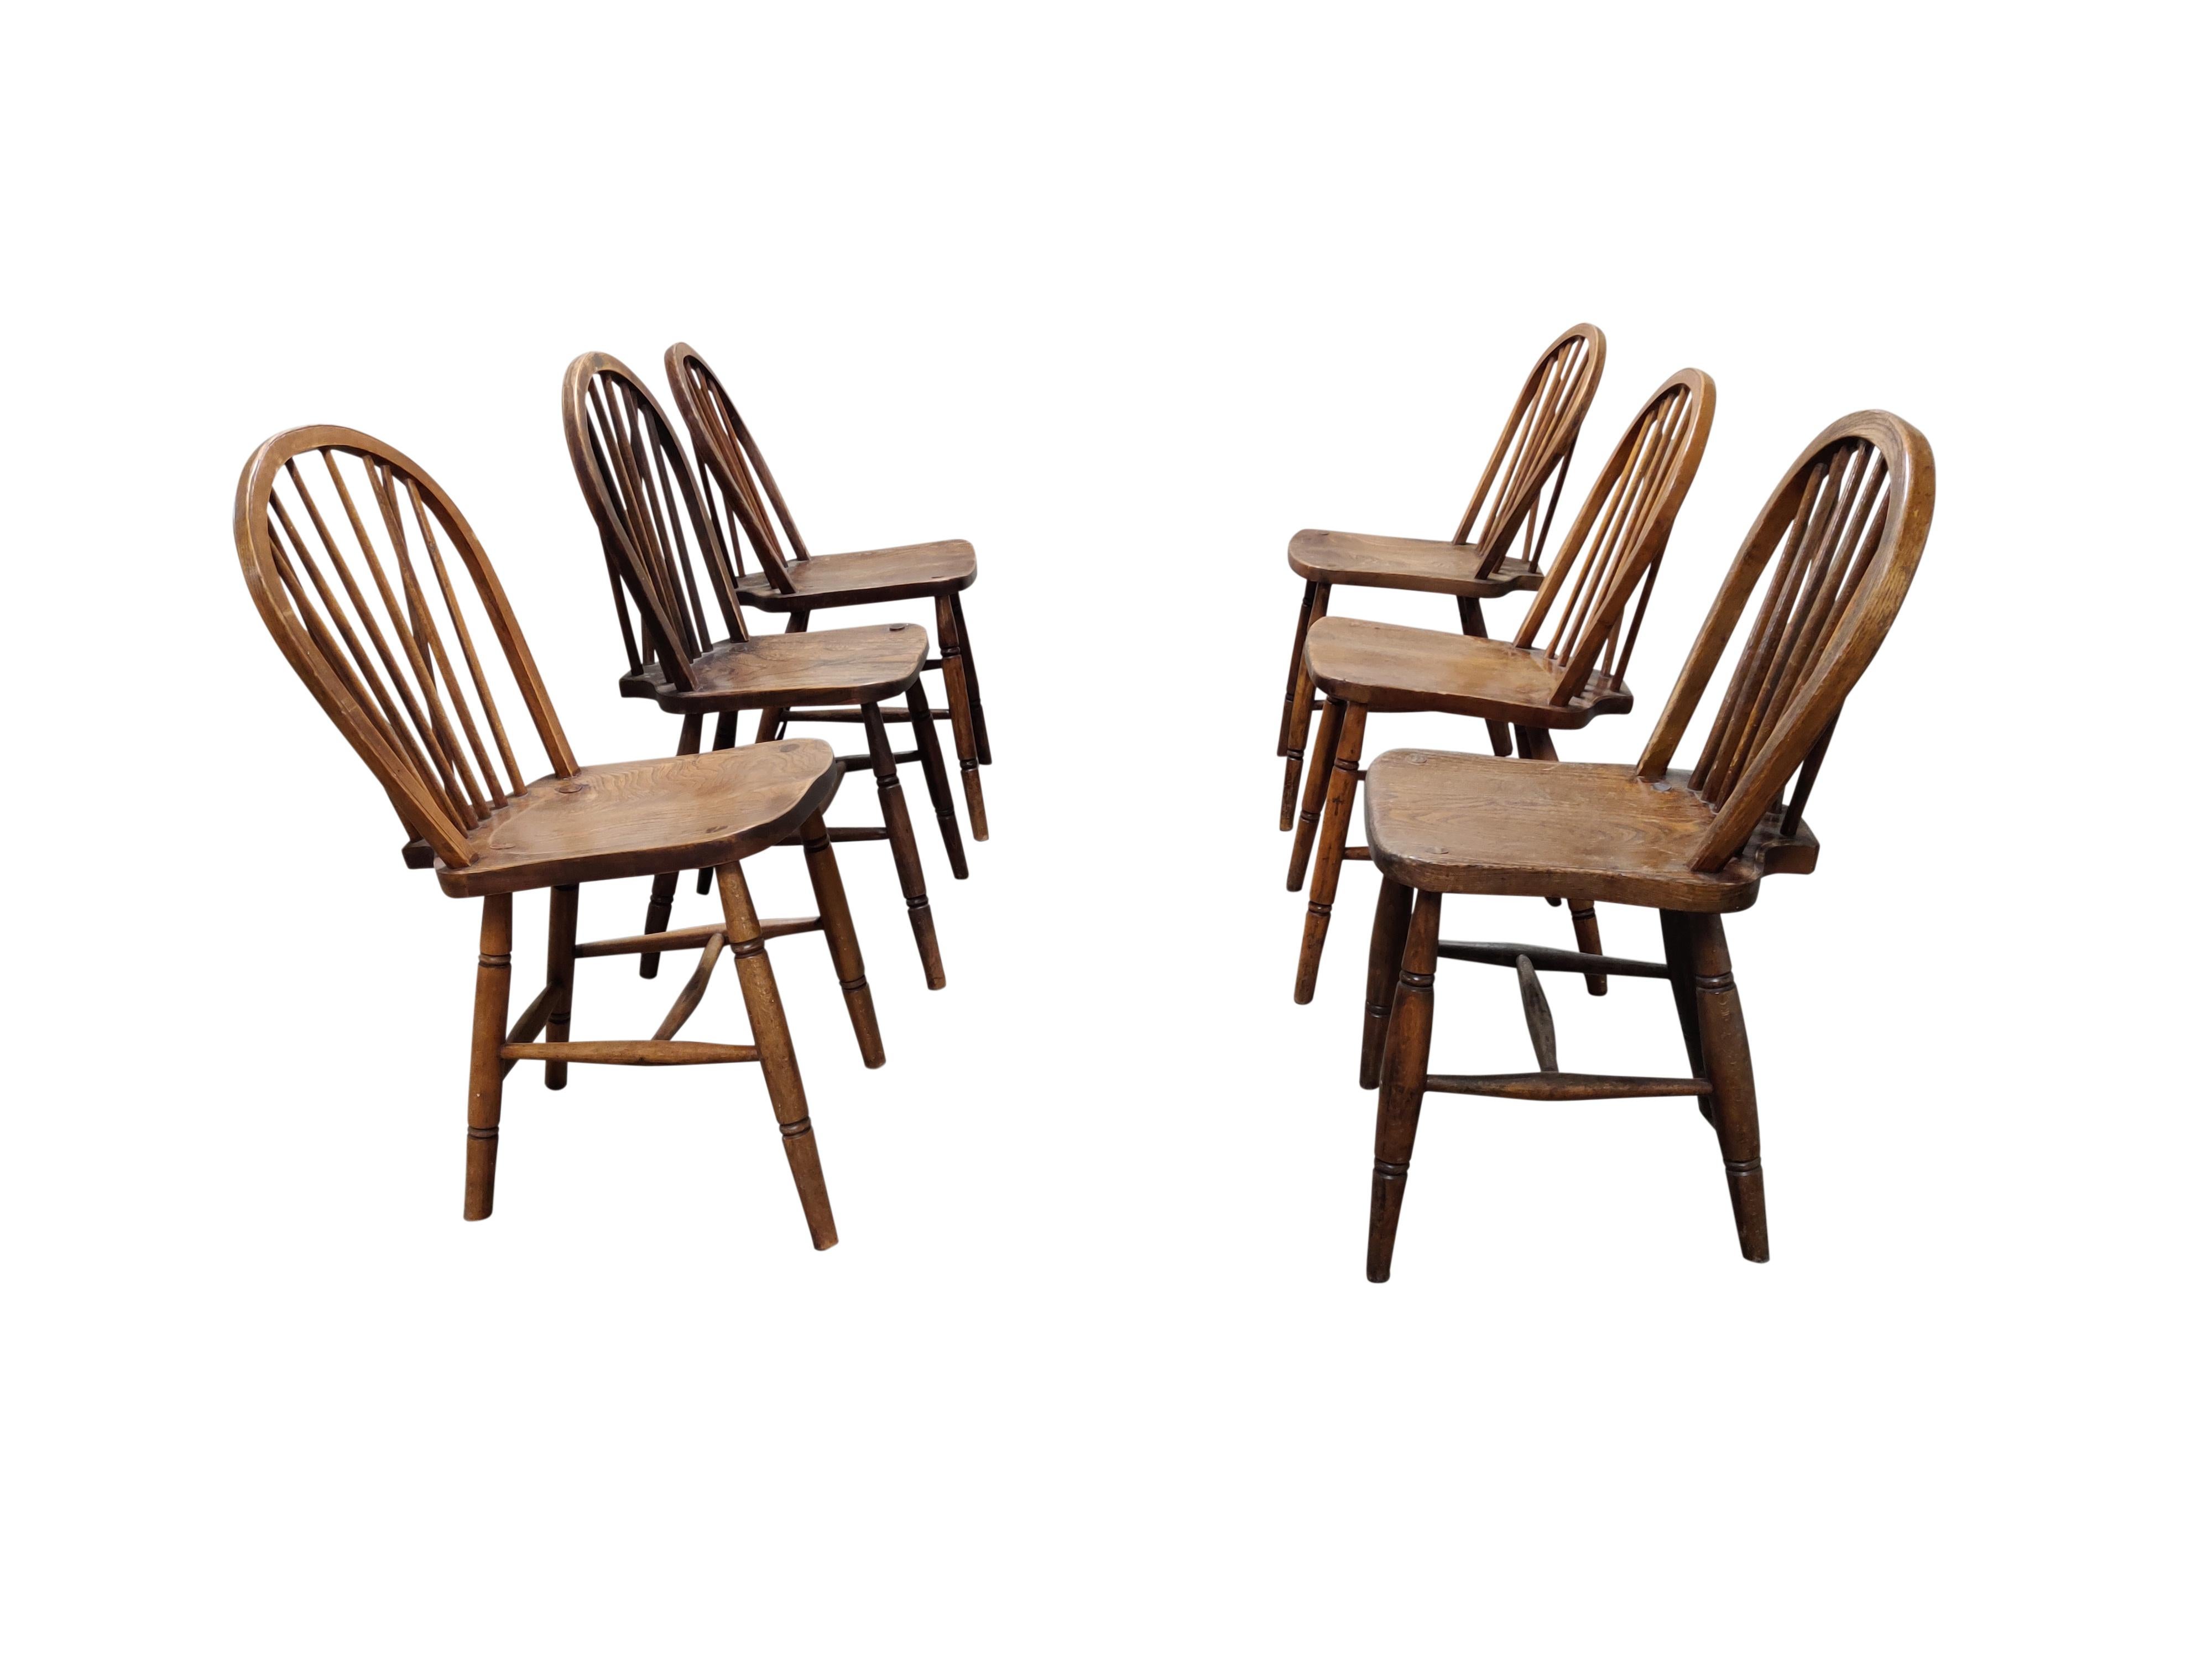 Set of 6 unique solid wooden dining chairs. 

This chairs were made in the 1950s by Lucian Ercolani.

As you can see in the pictures, the chairs have a very special backside which is typical for Ercol chairs.

1950s, Italy

The chairs are